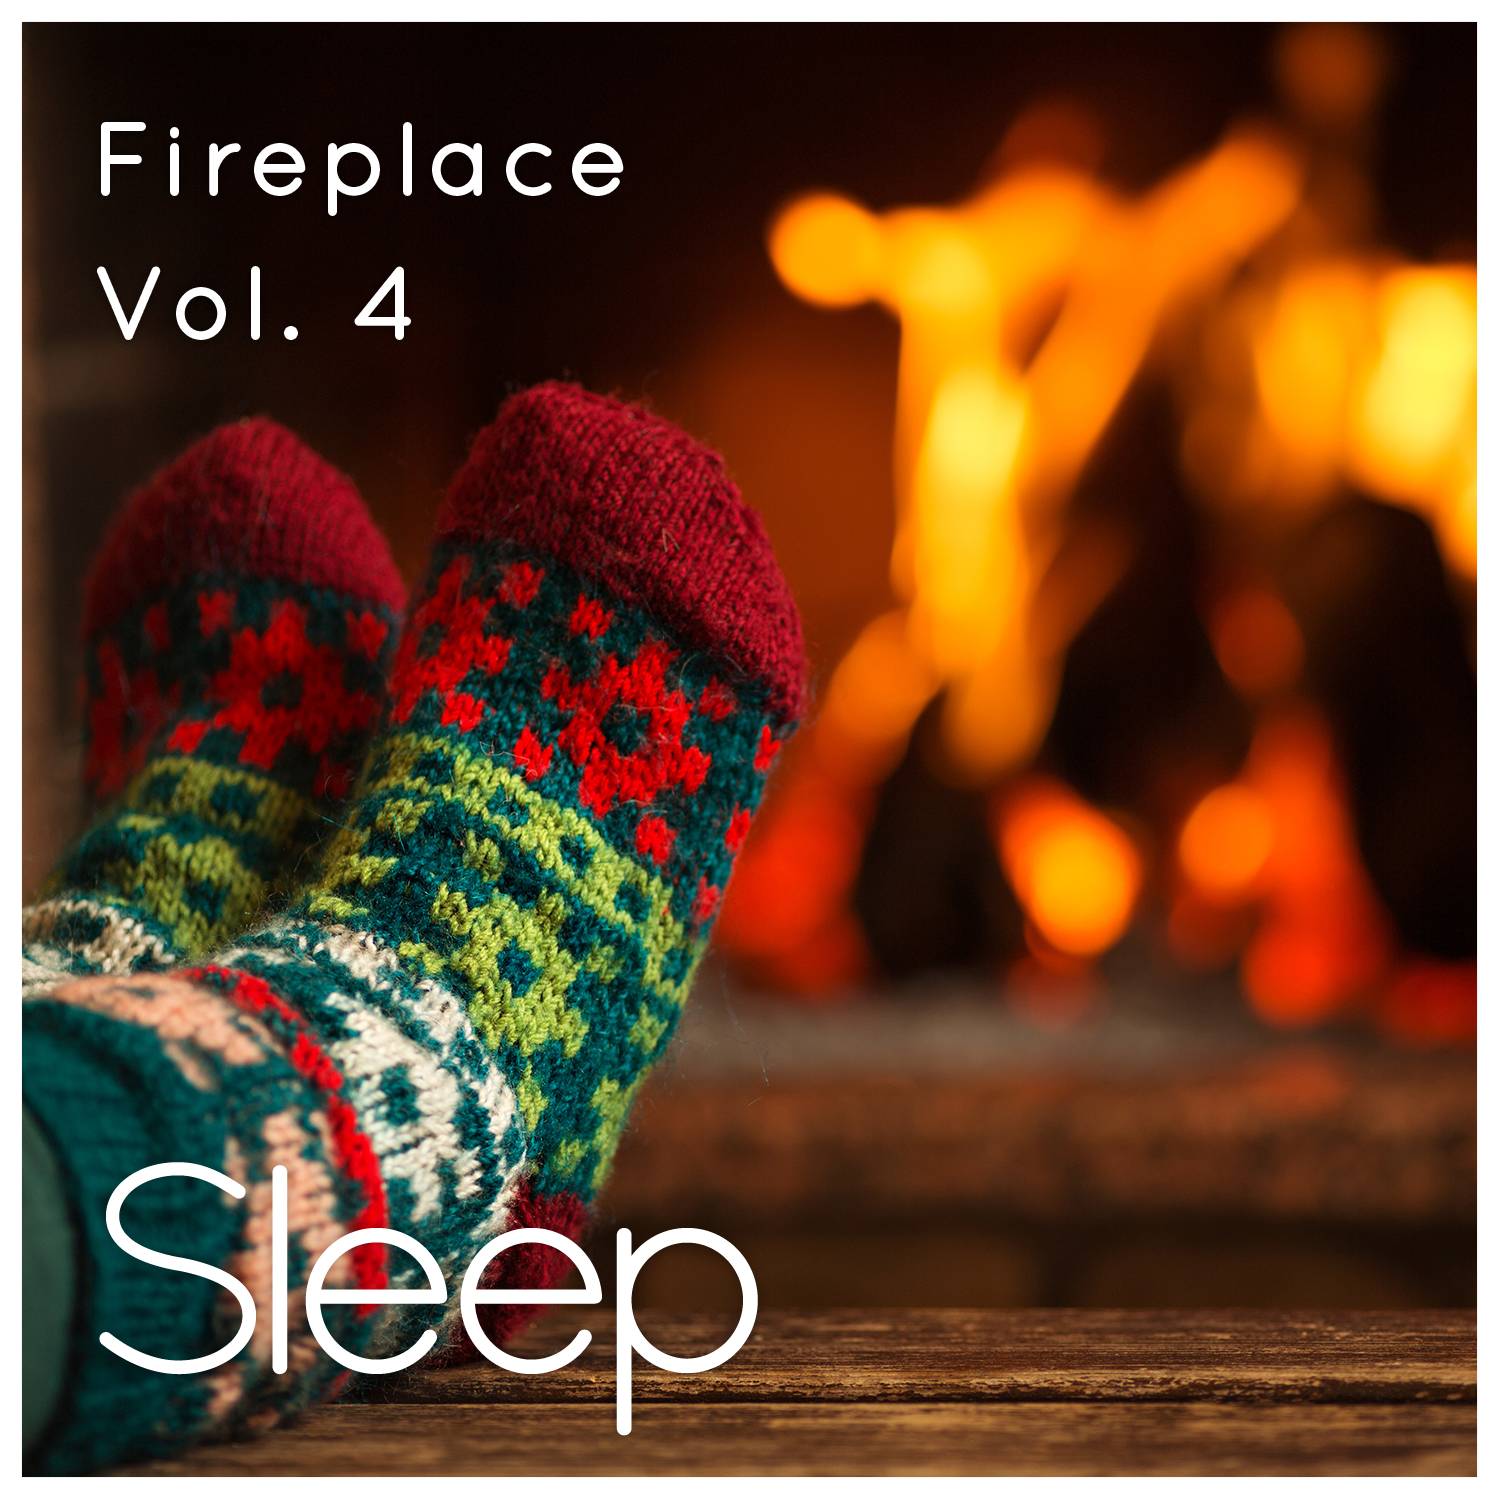 Sleep by Fireplace in Cabin, Vol. 4